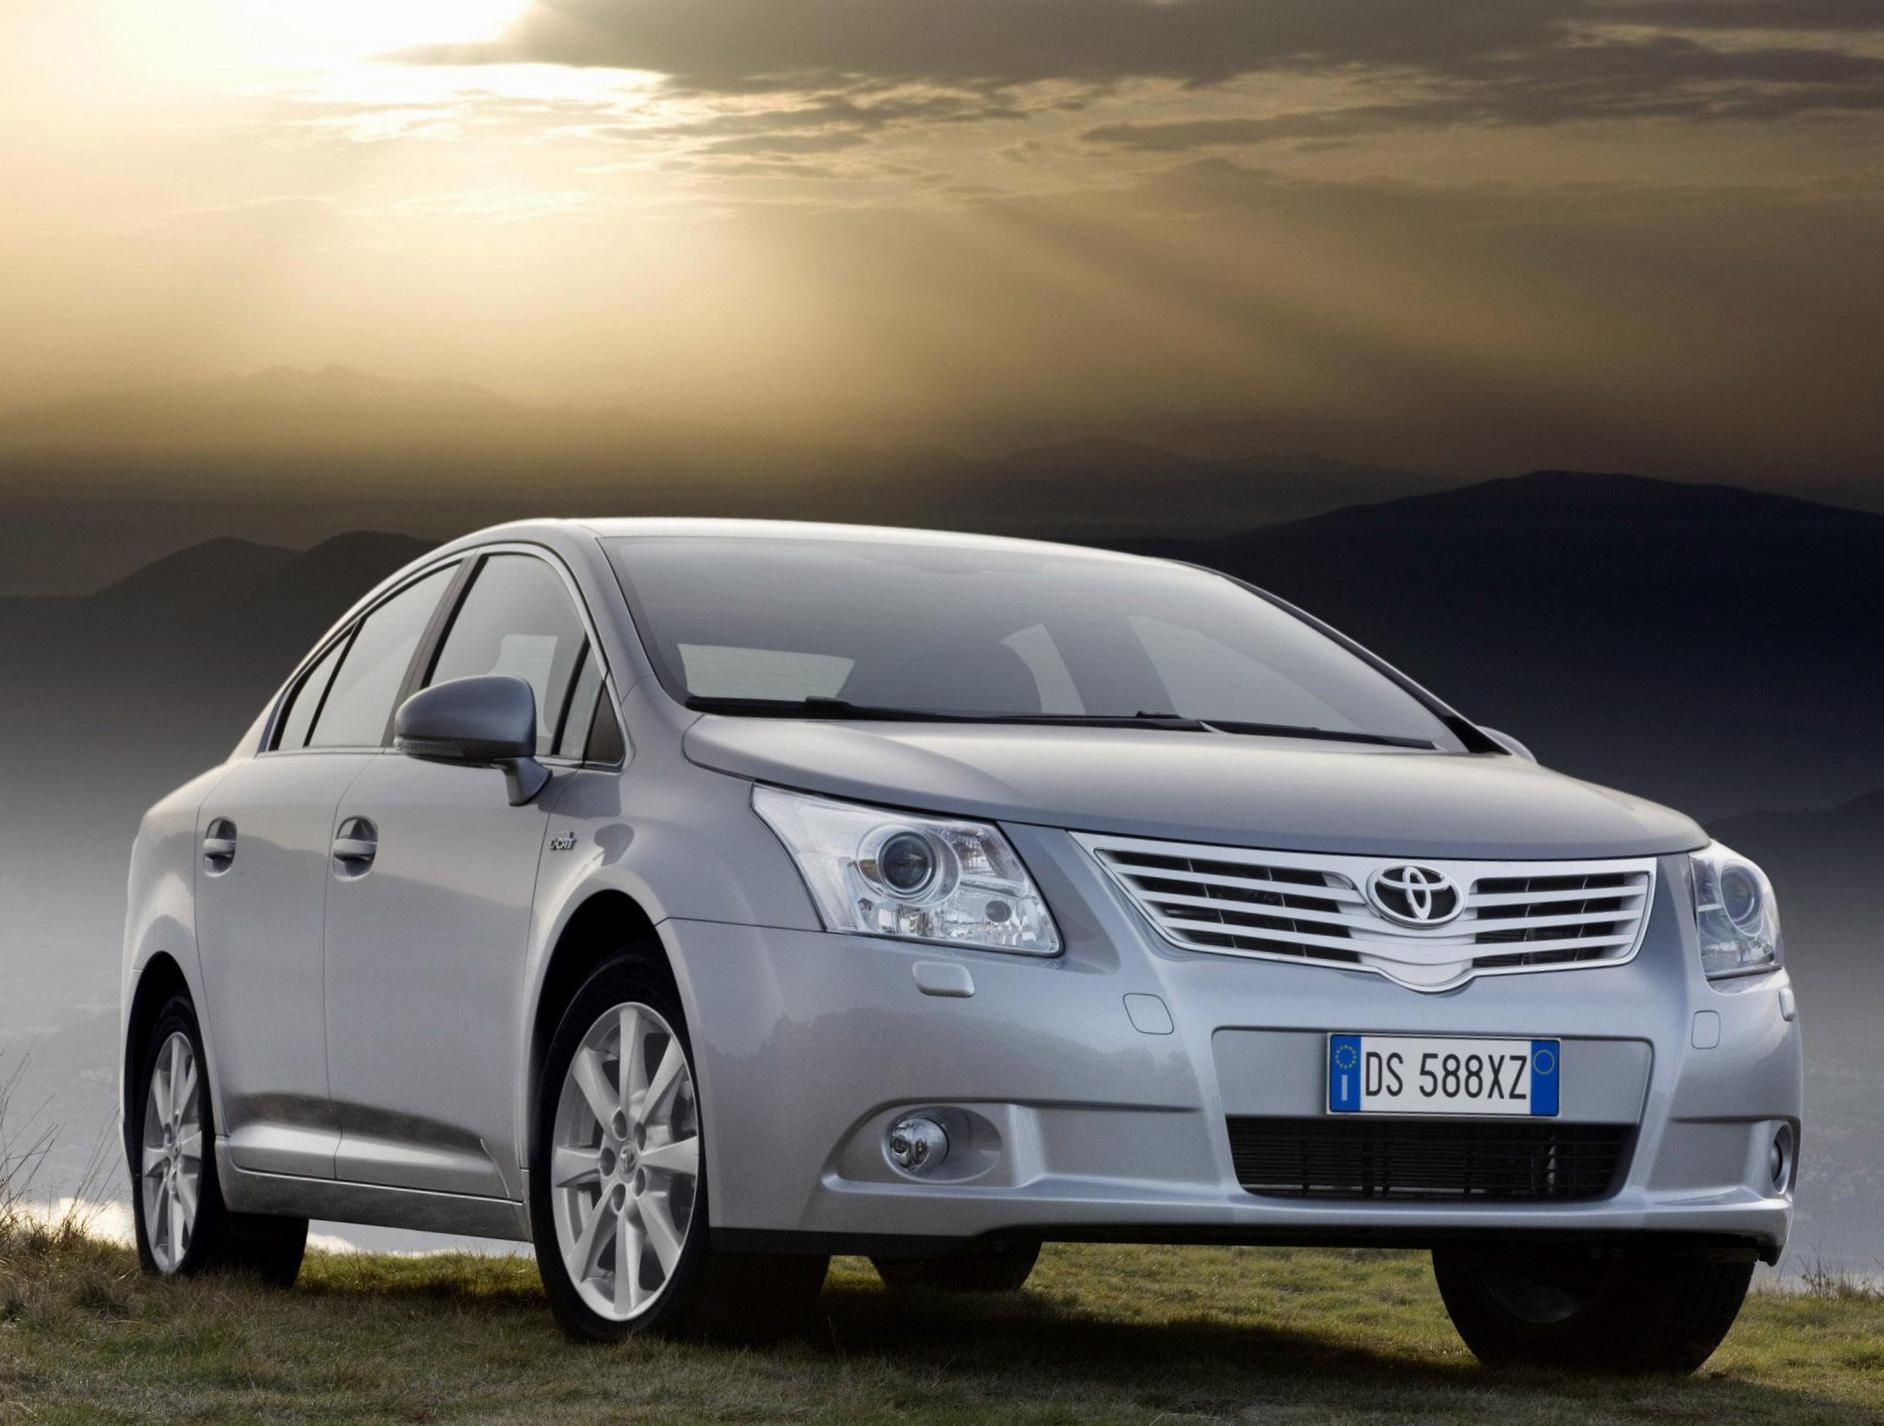 Toyota Avensis Photo and Specs. Photo: Avensis Toyota used and 24 perfect photo of Toyota Avensis. Toyota avensis, Toyota, Sedan